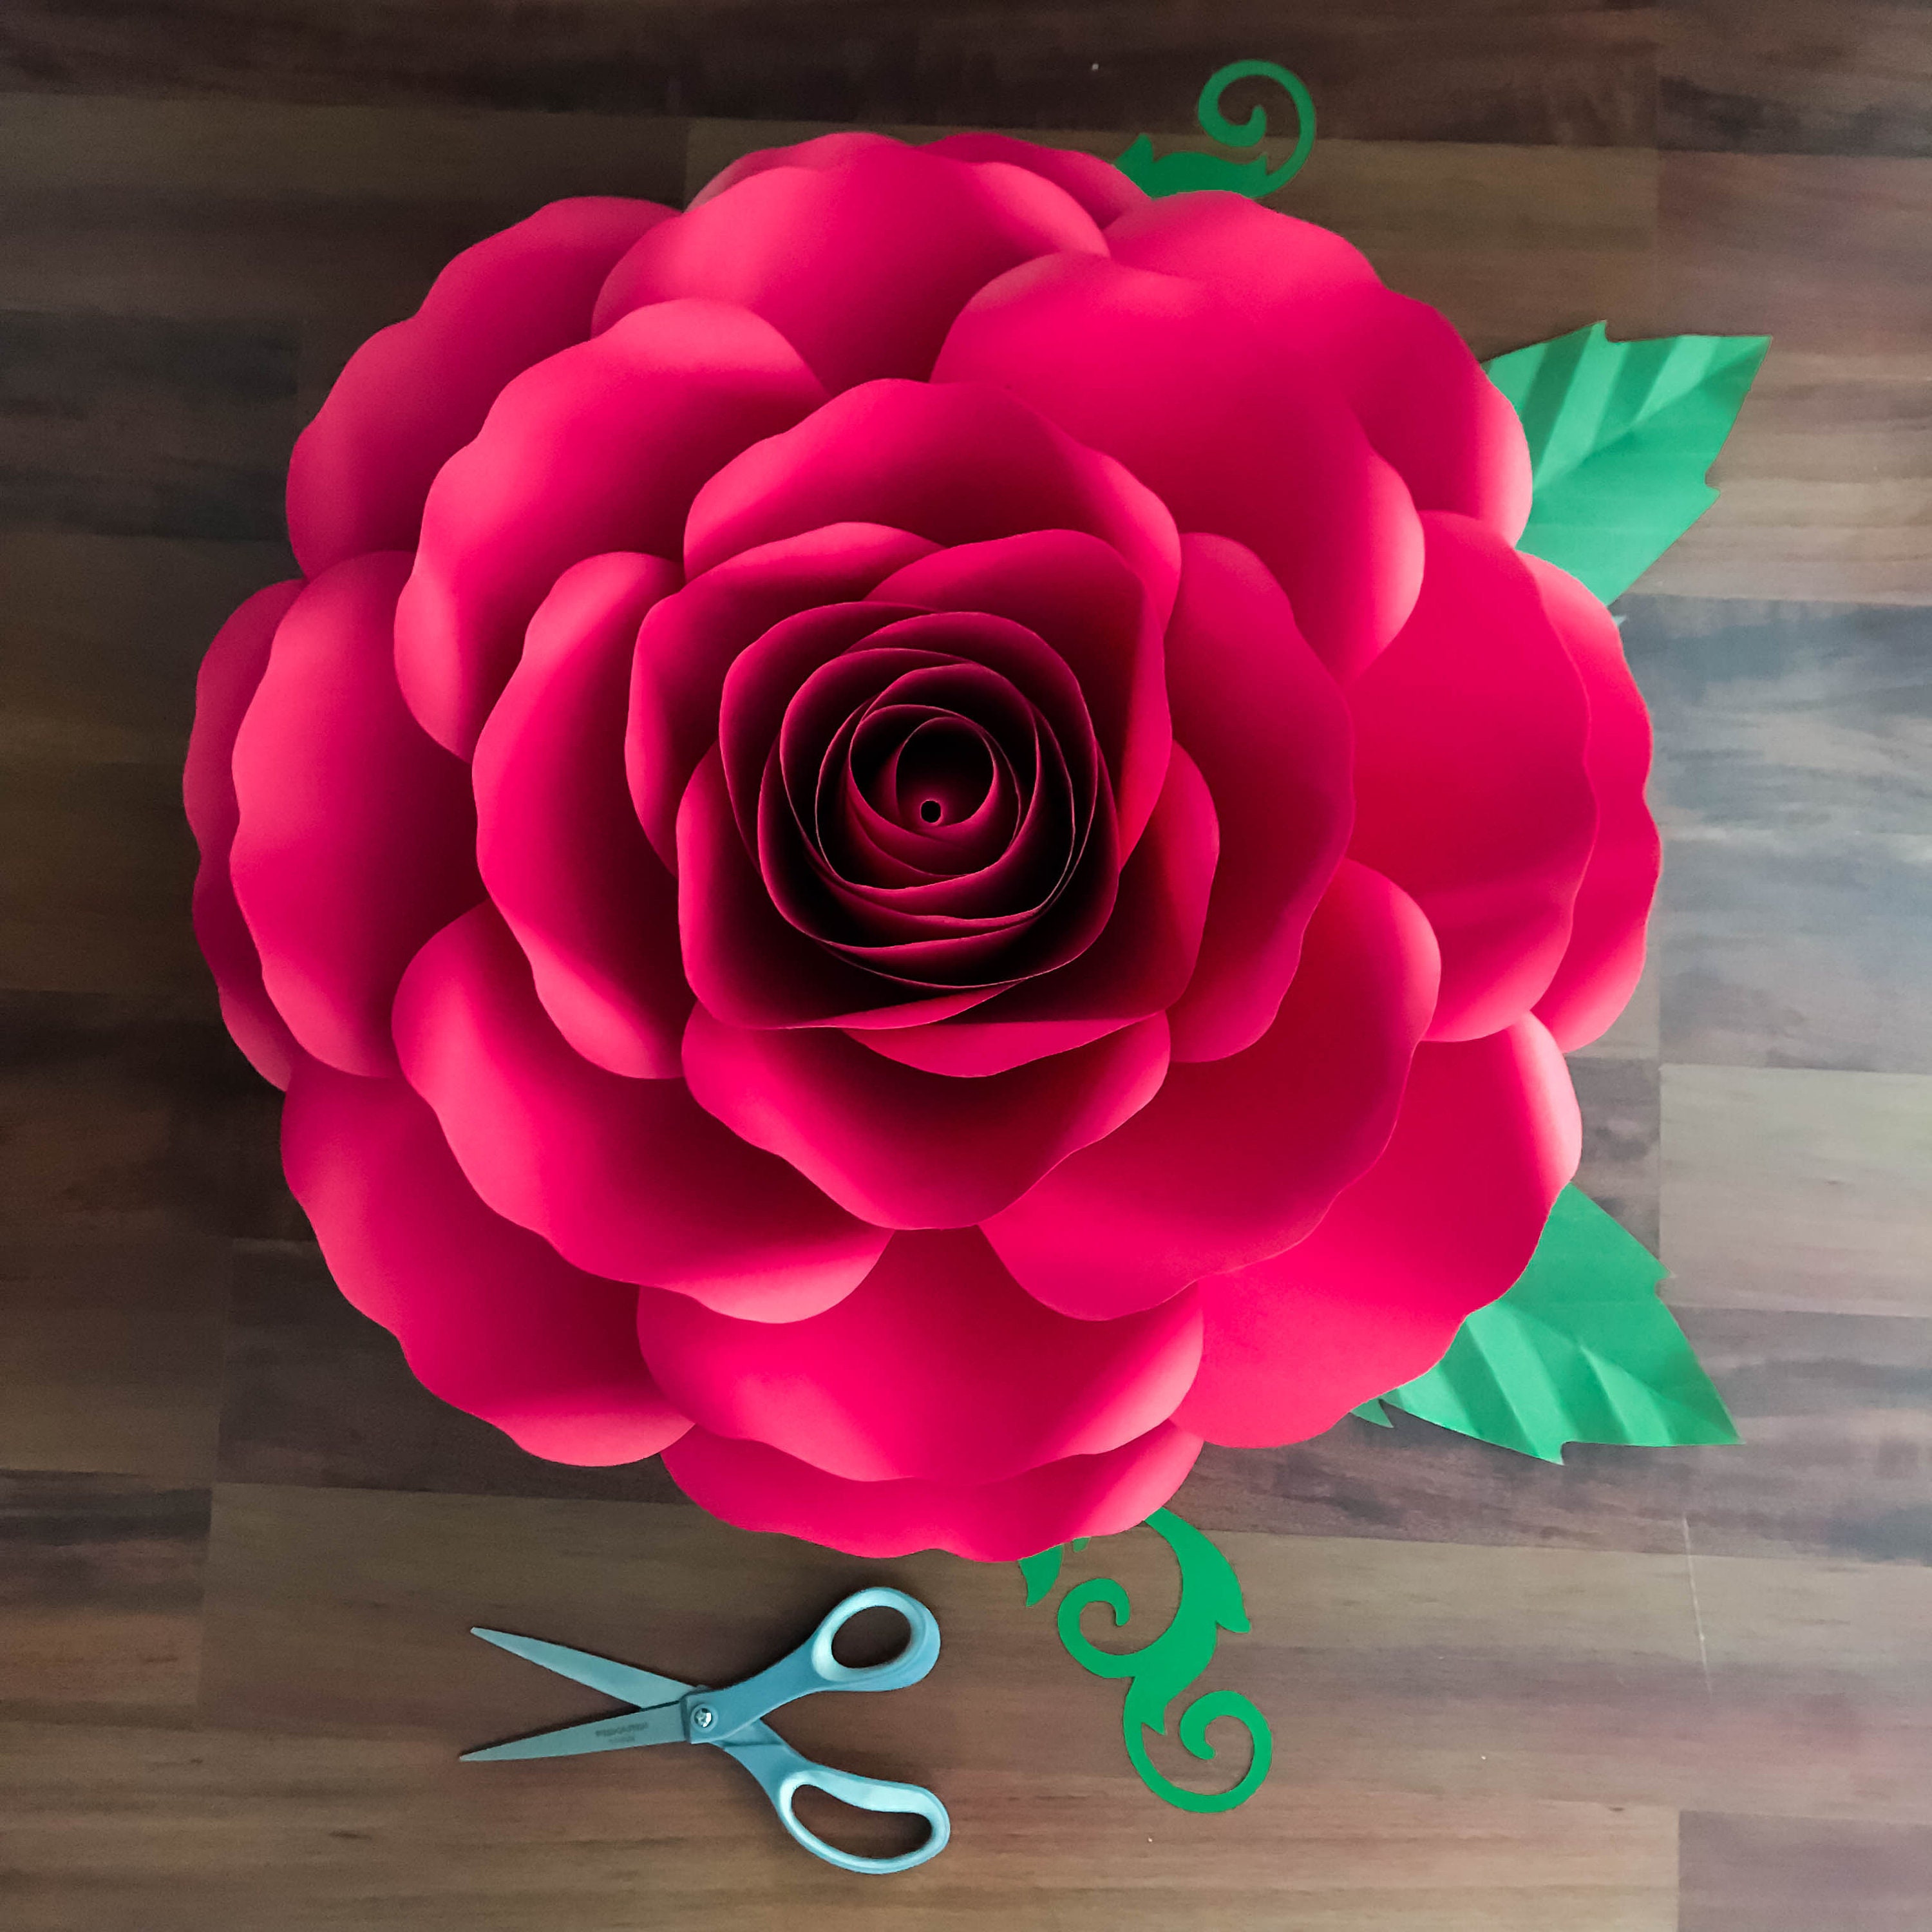 pdf-a4-xl-rose-paper-flower-templates-w-rose-bub-center-included